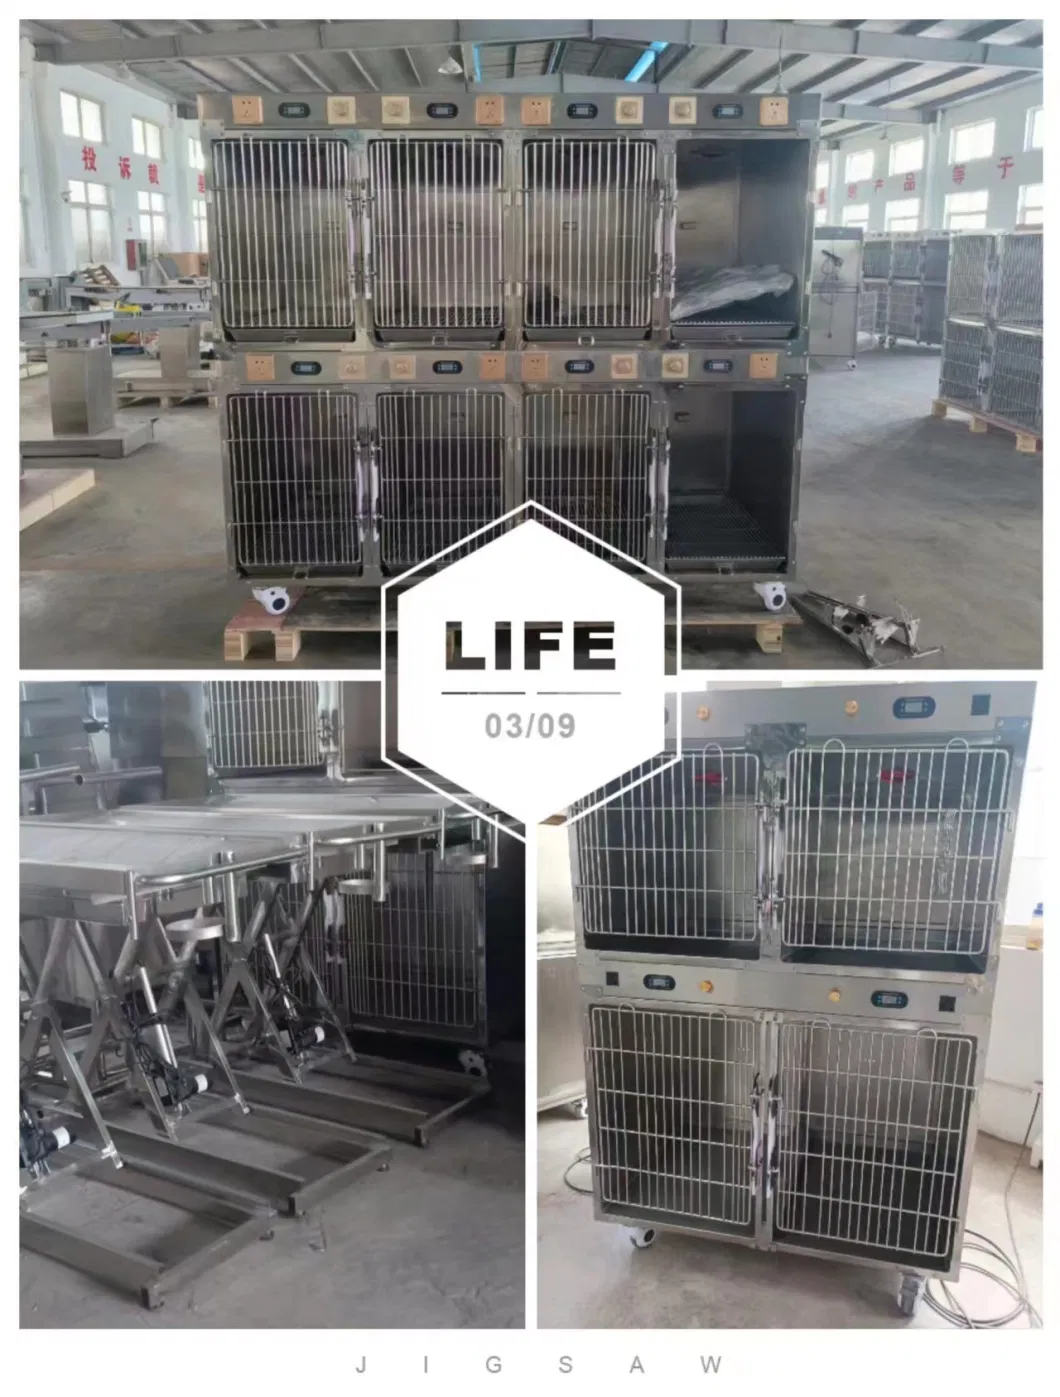 Dog Grooming Salon Pet Dryer Large Automatic Drying Machine Professional Cat Hair Dryer Box Smart Dog Cat Grooming Room